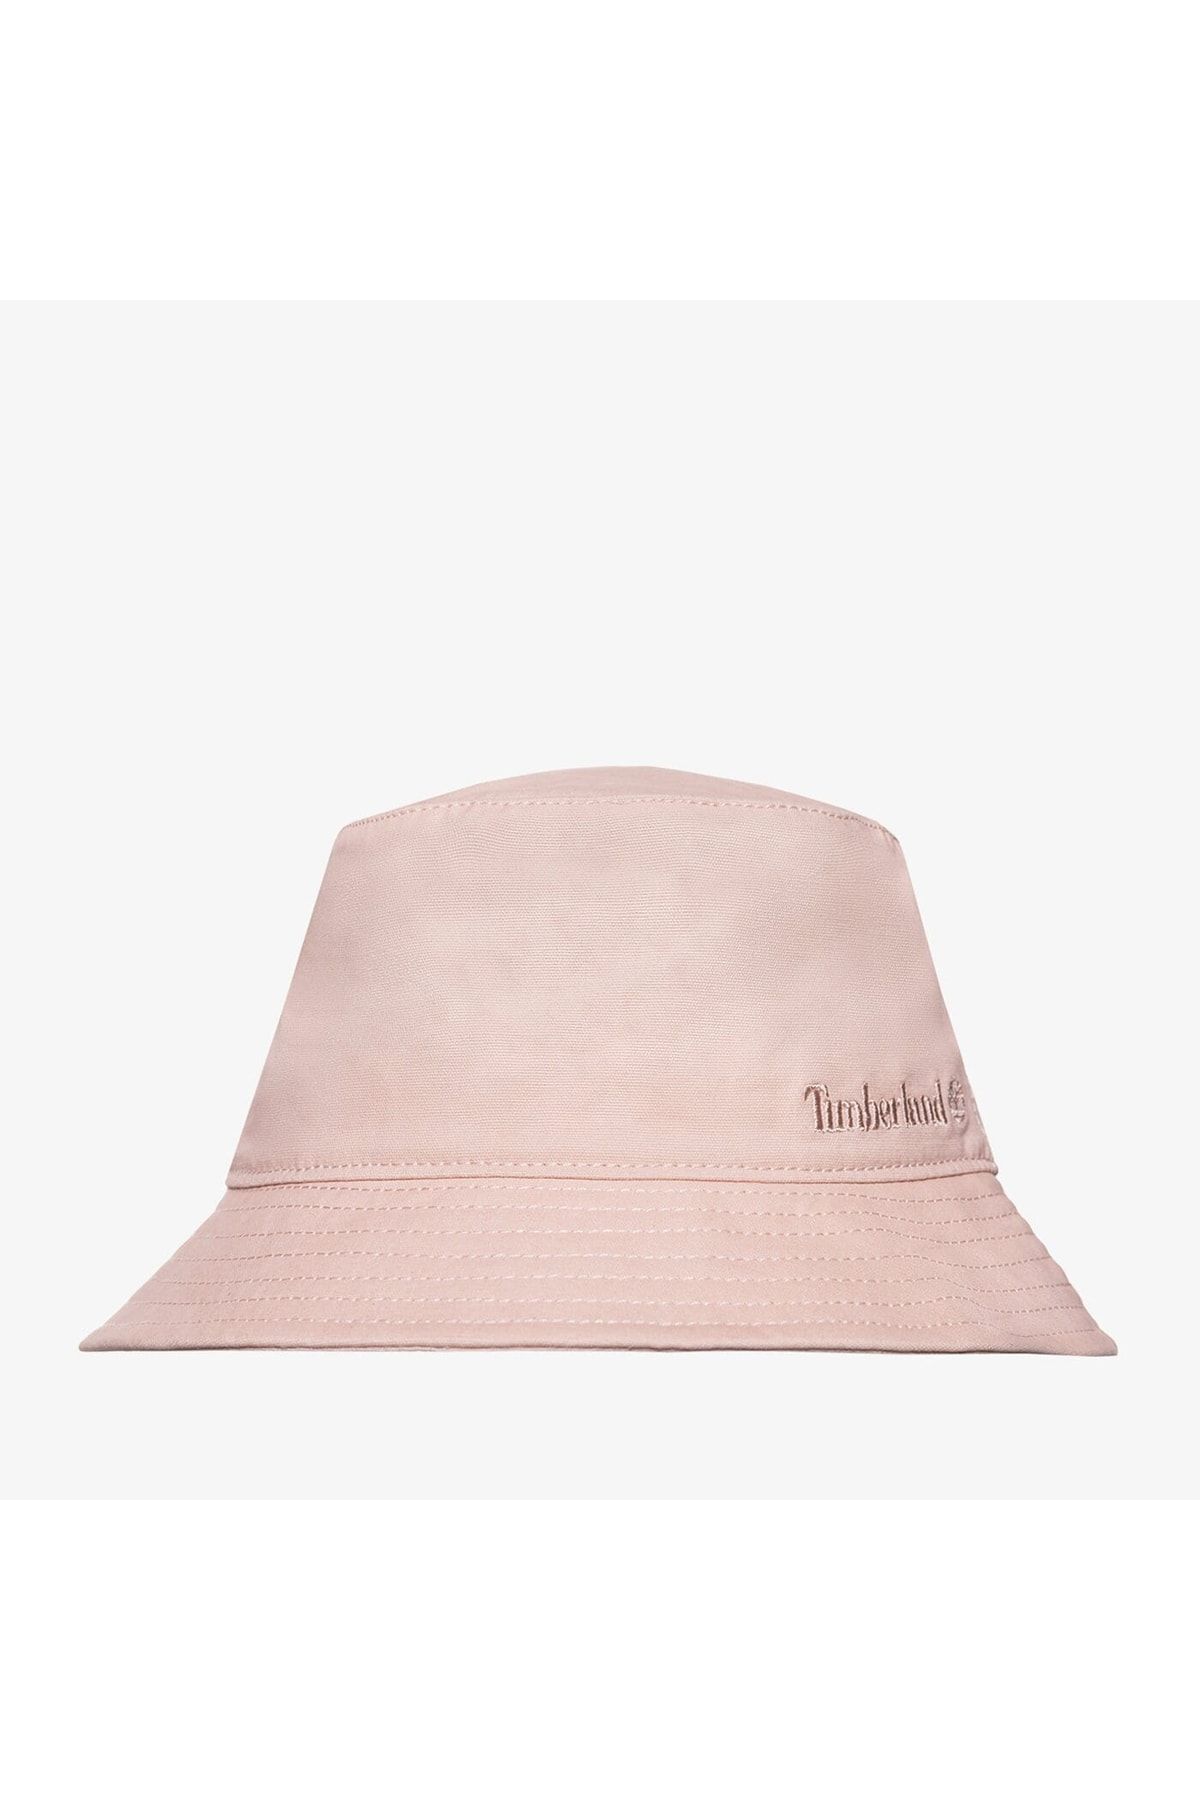 Timberland Peached Cotton Canvas Bucket Hat - Cameo Rose